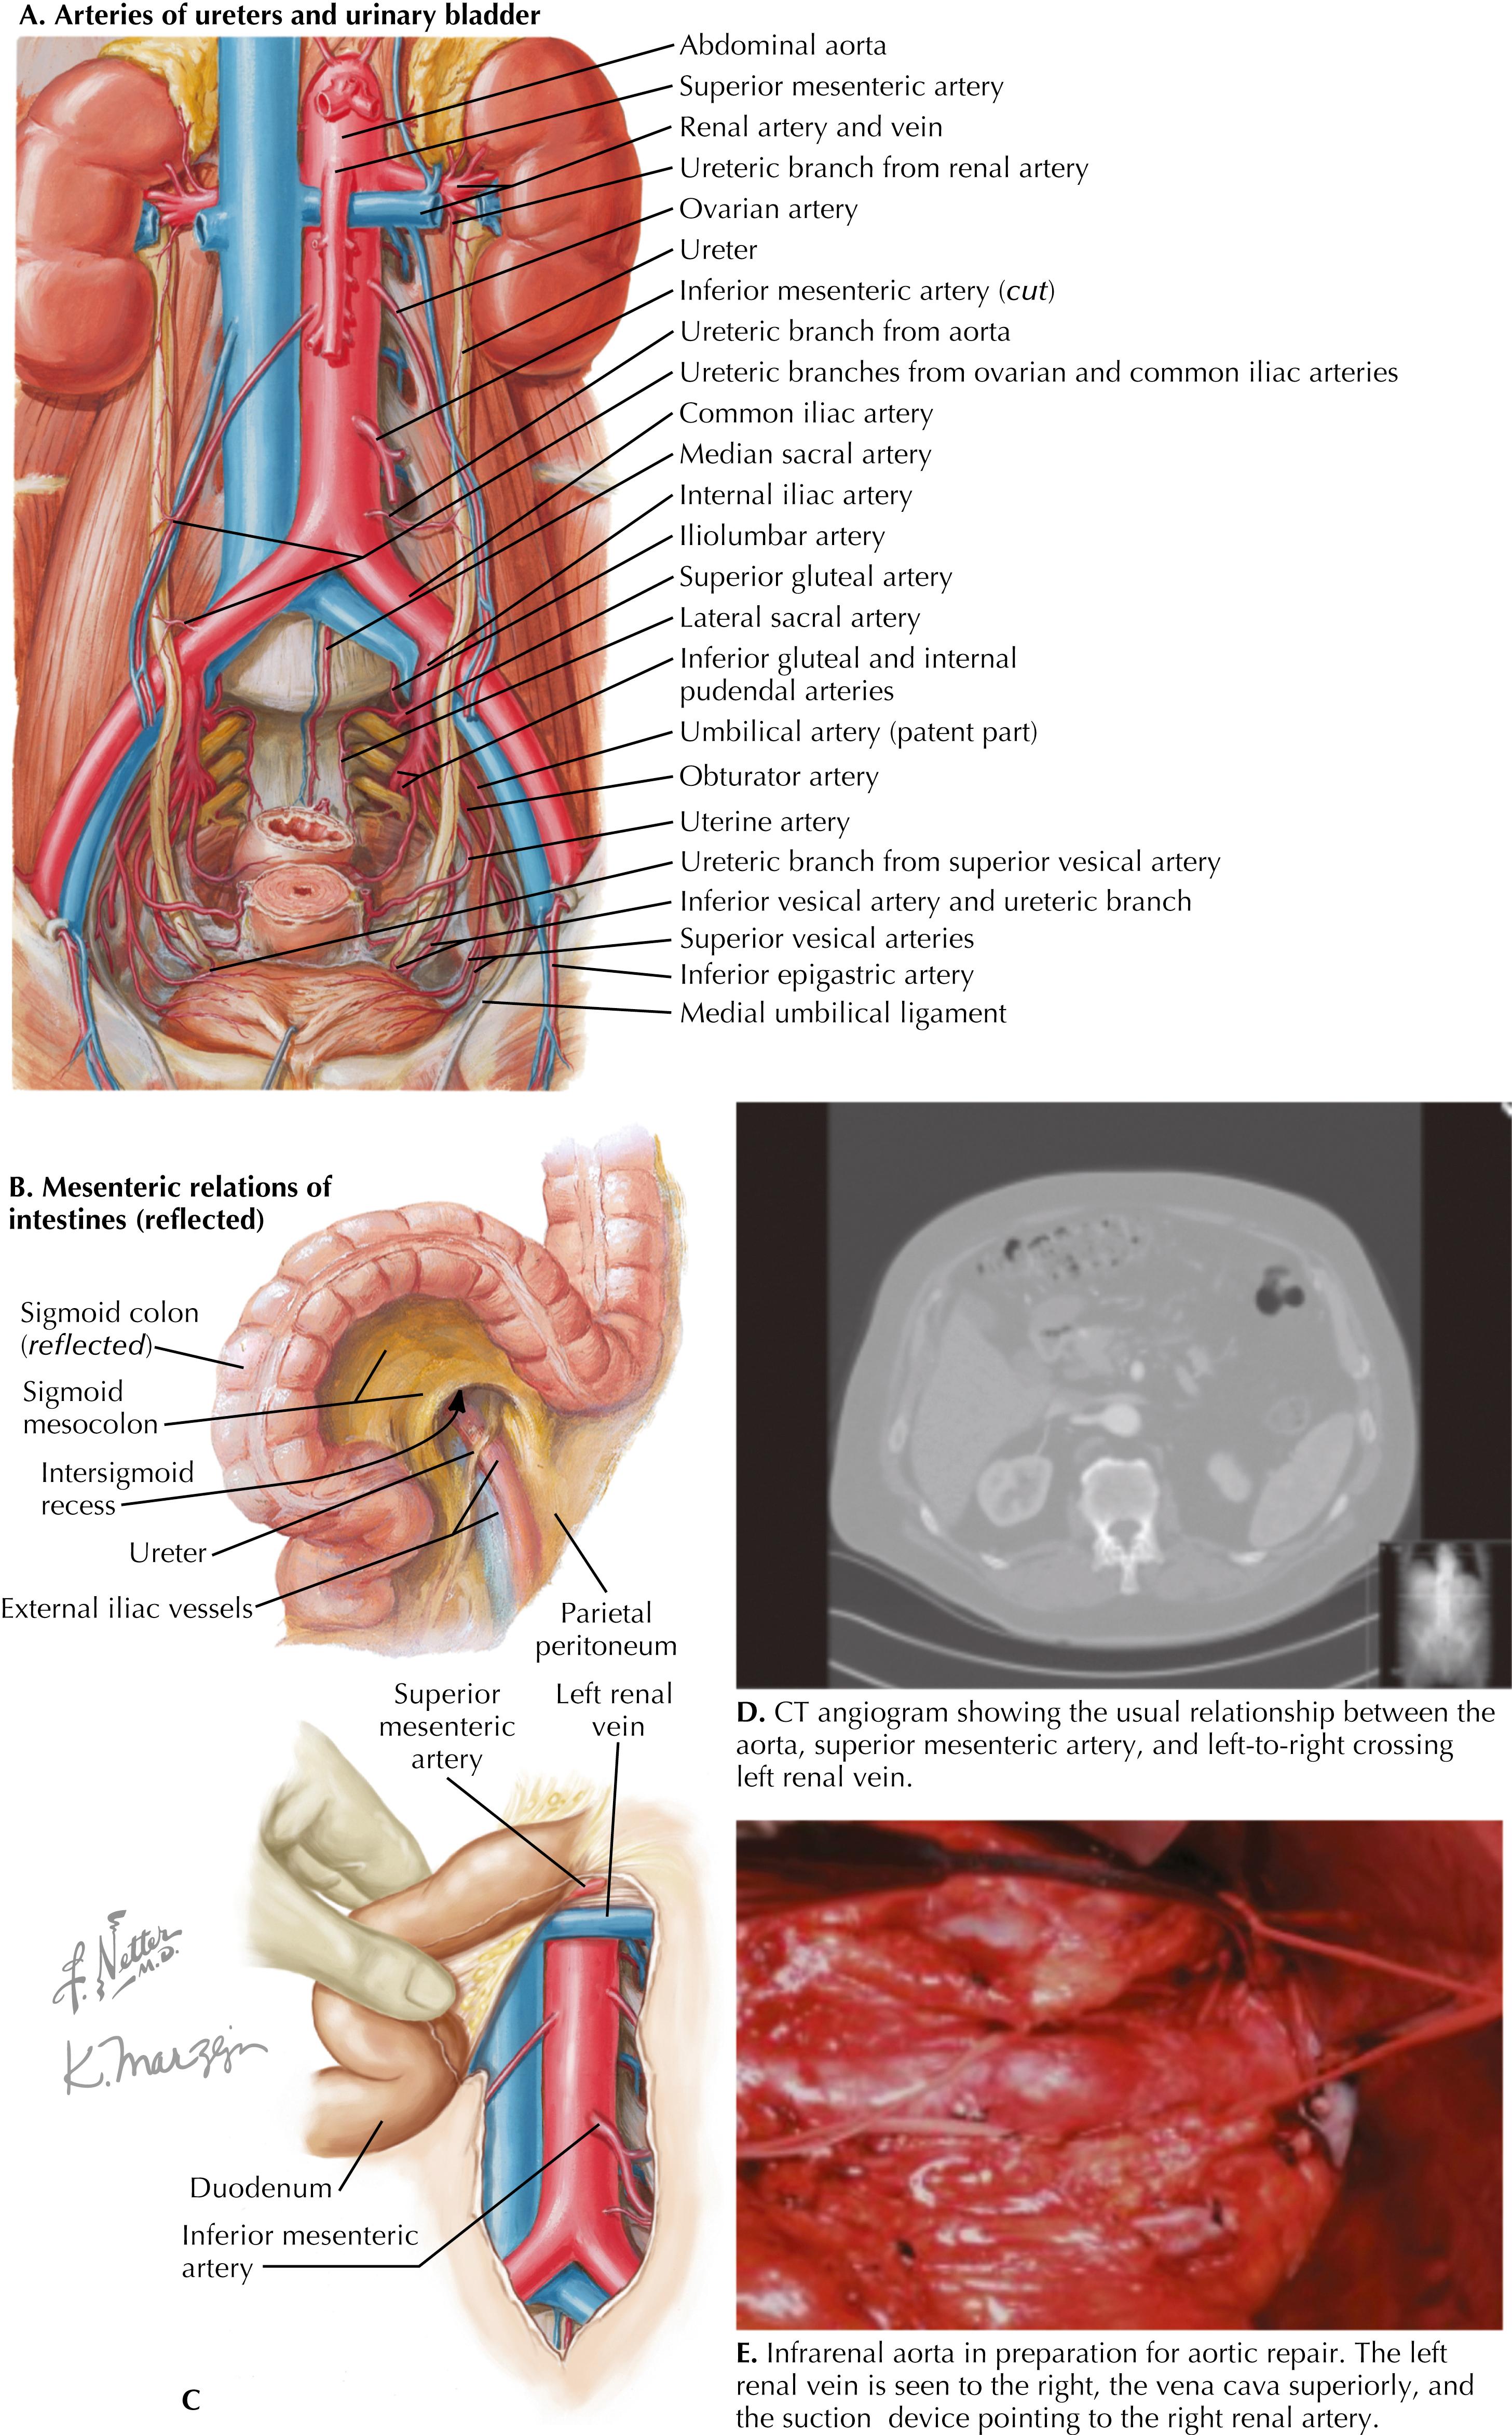 FIGURE 43.2, Aortic and iliac arterial relationships with retroperitoneal structures.